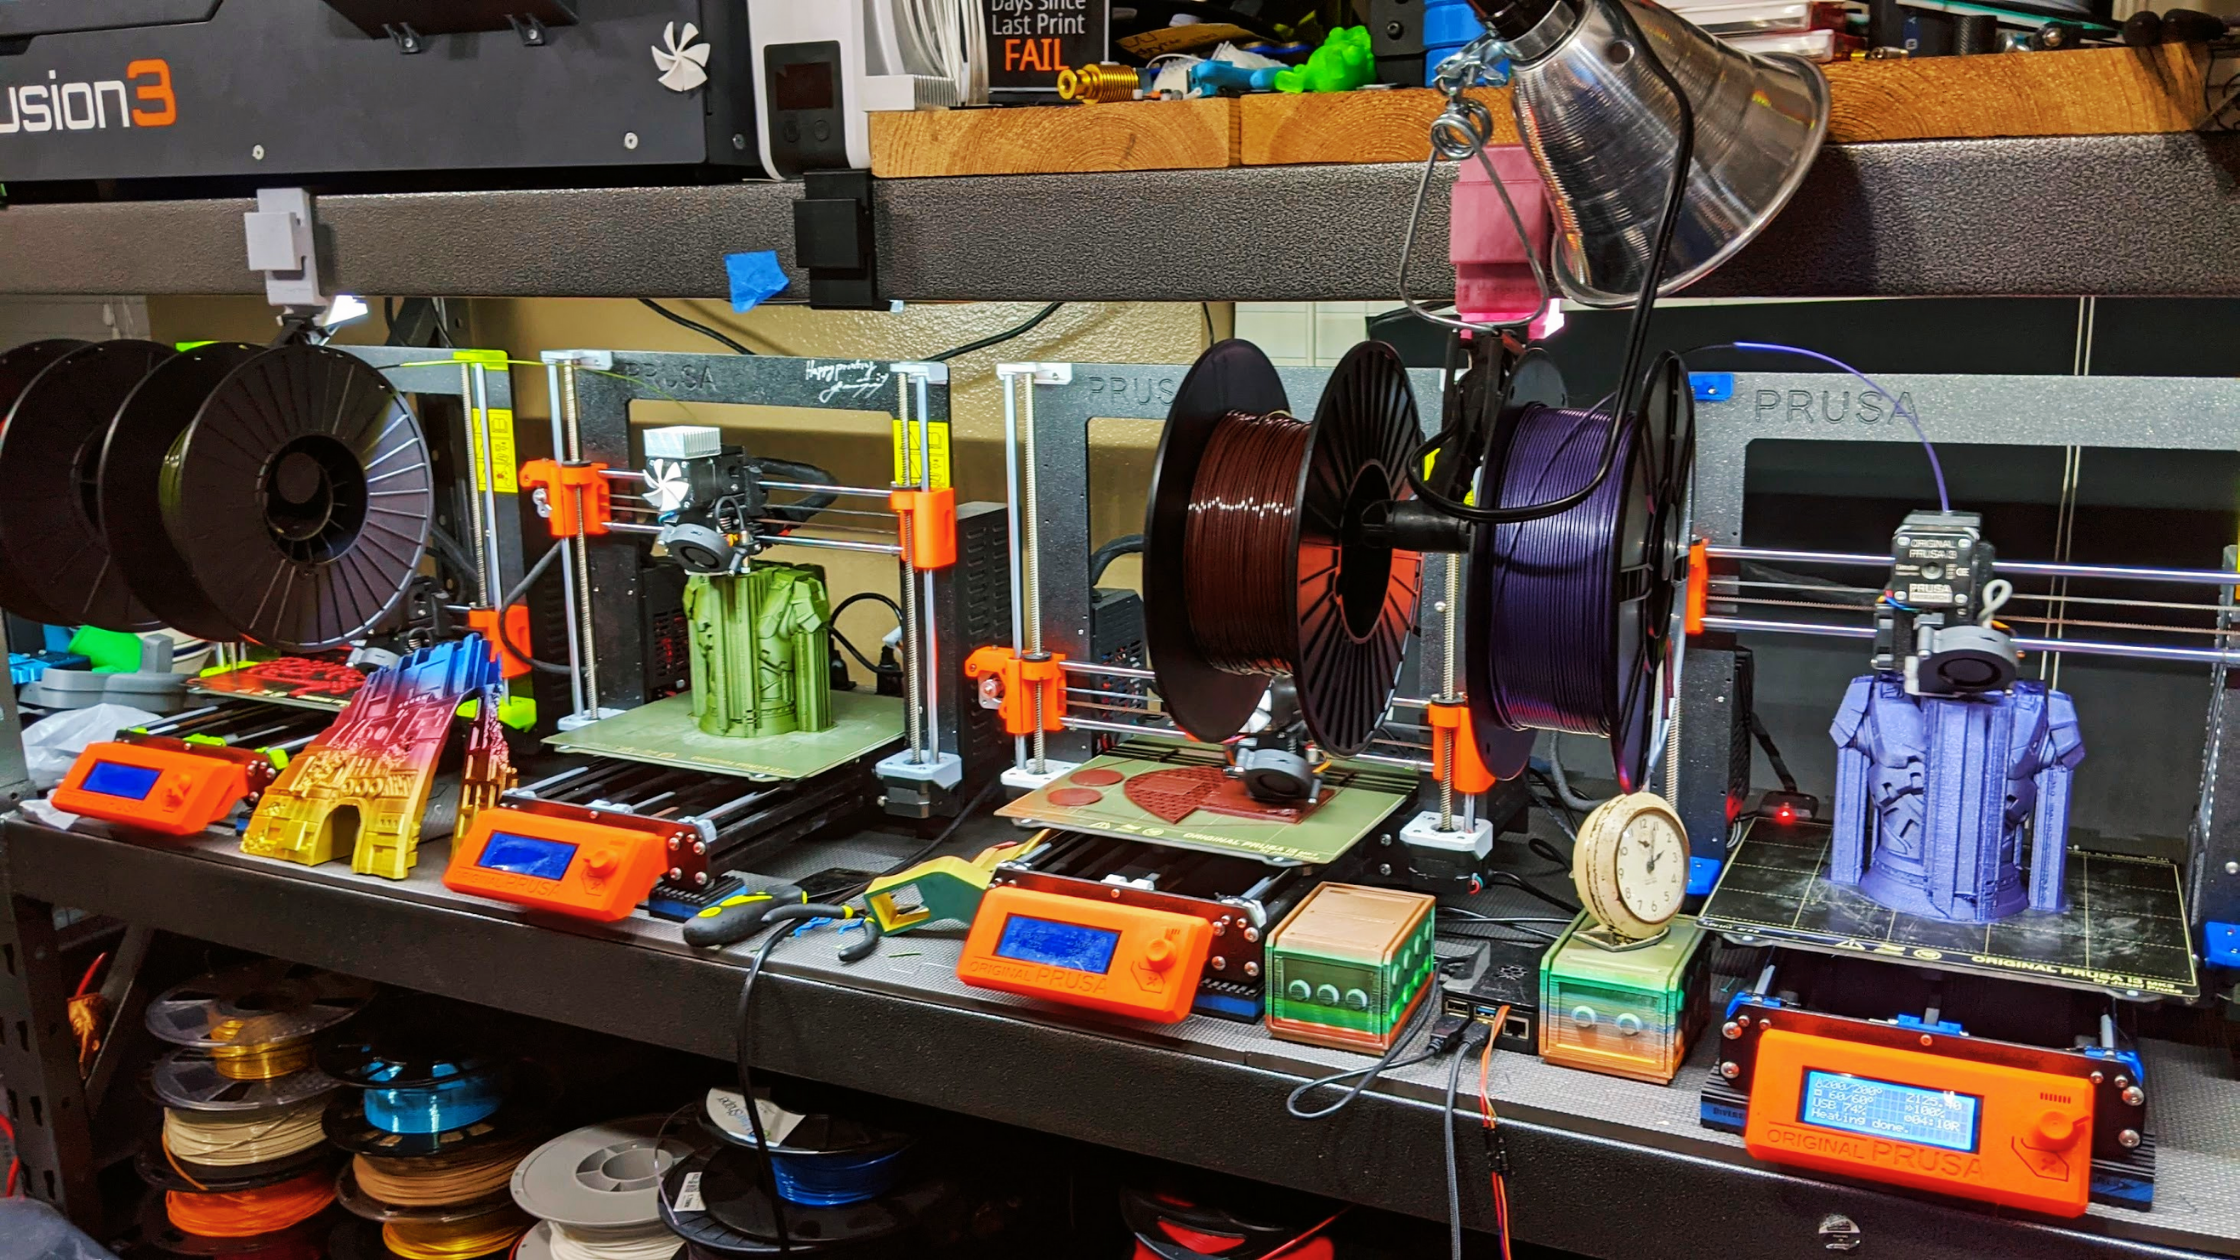 Row of four orange Prusa printers above spools of filament printing colorful 3D prints.